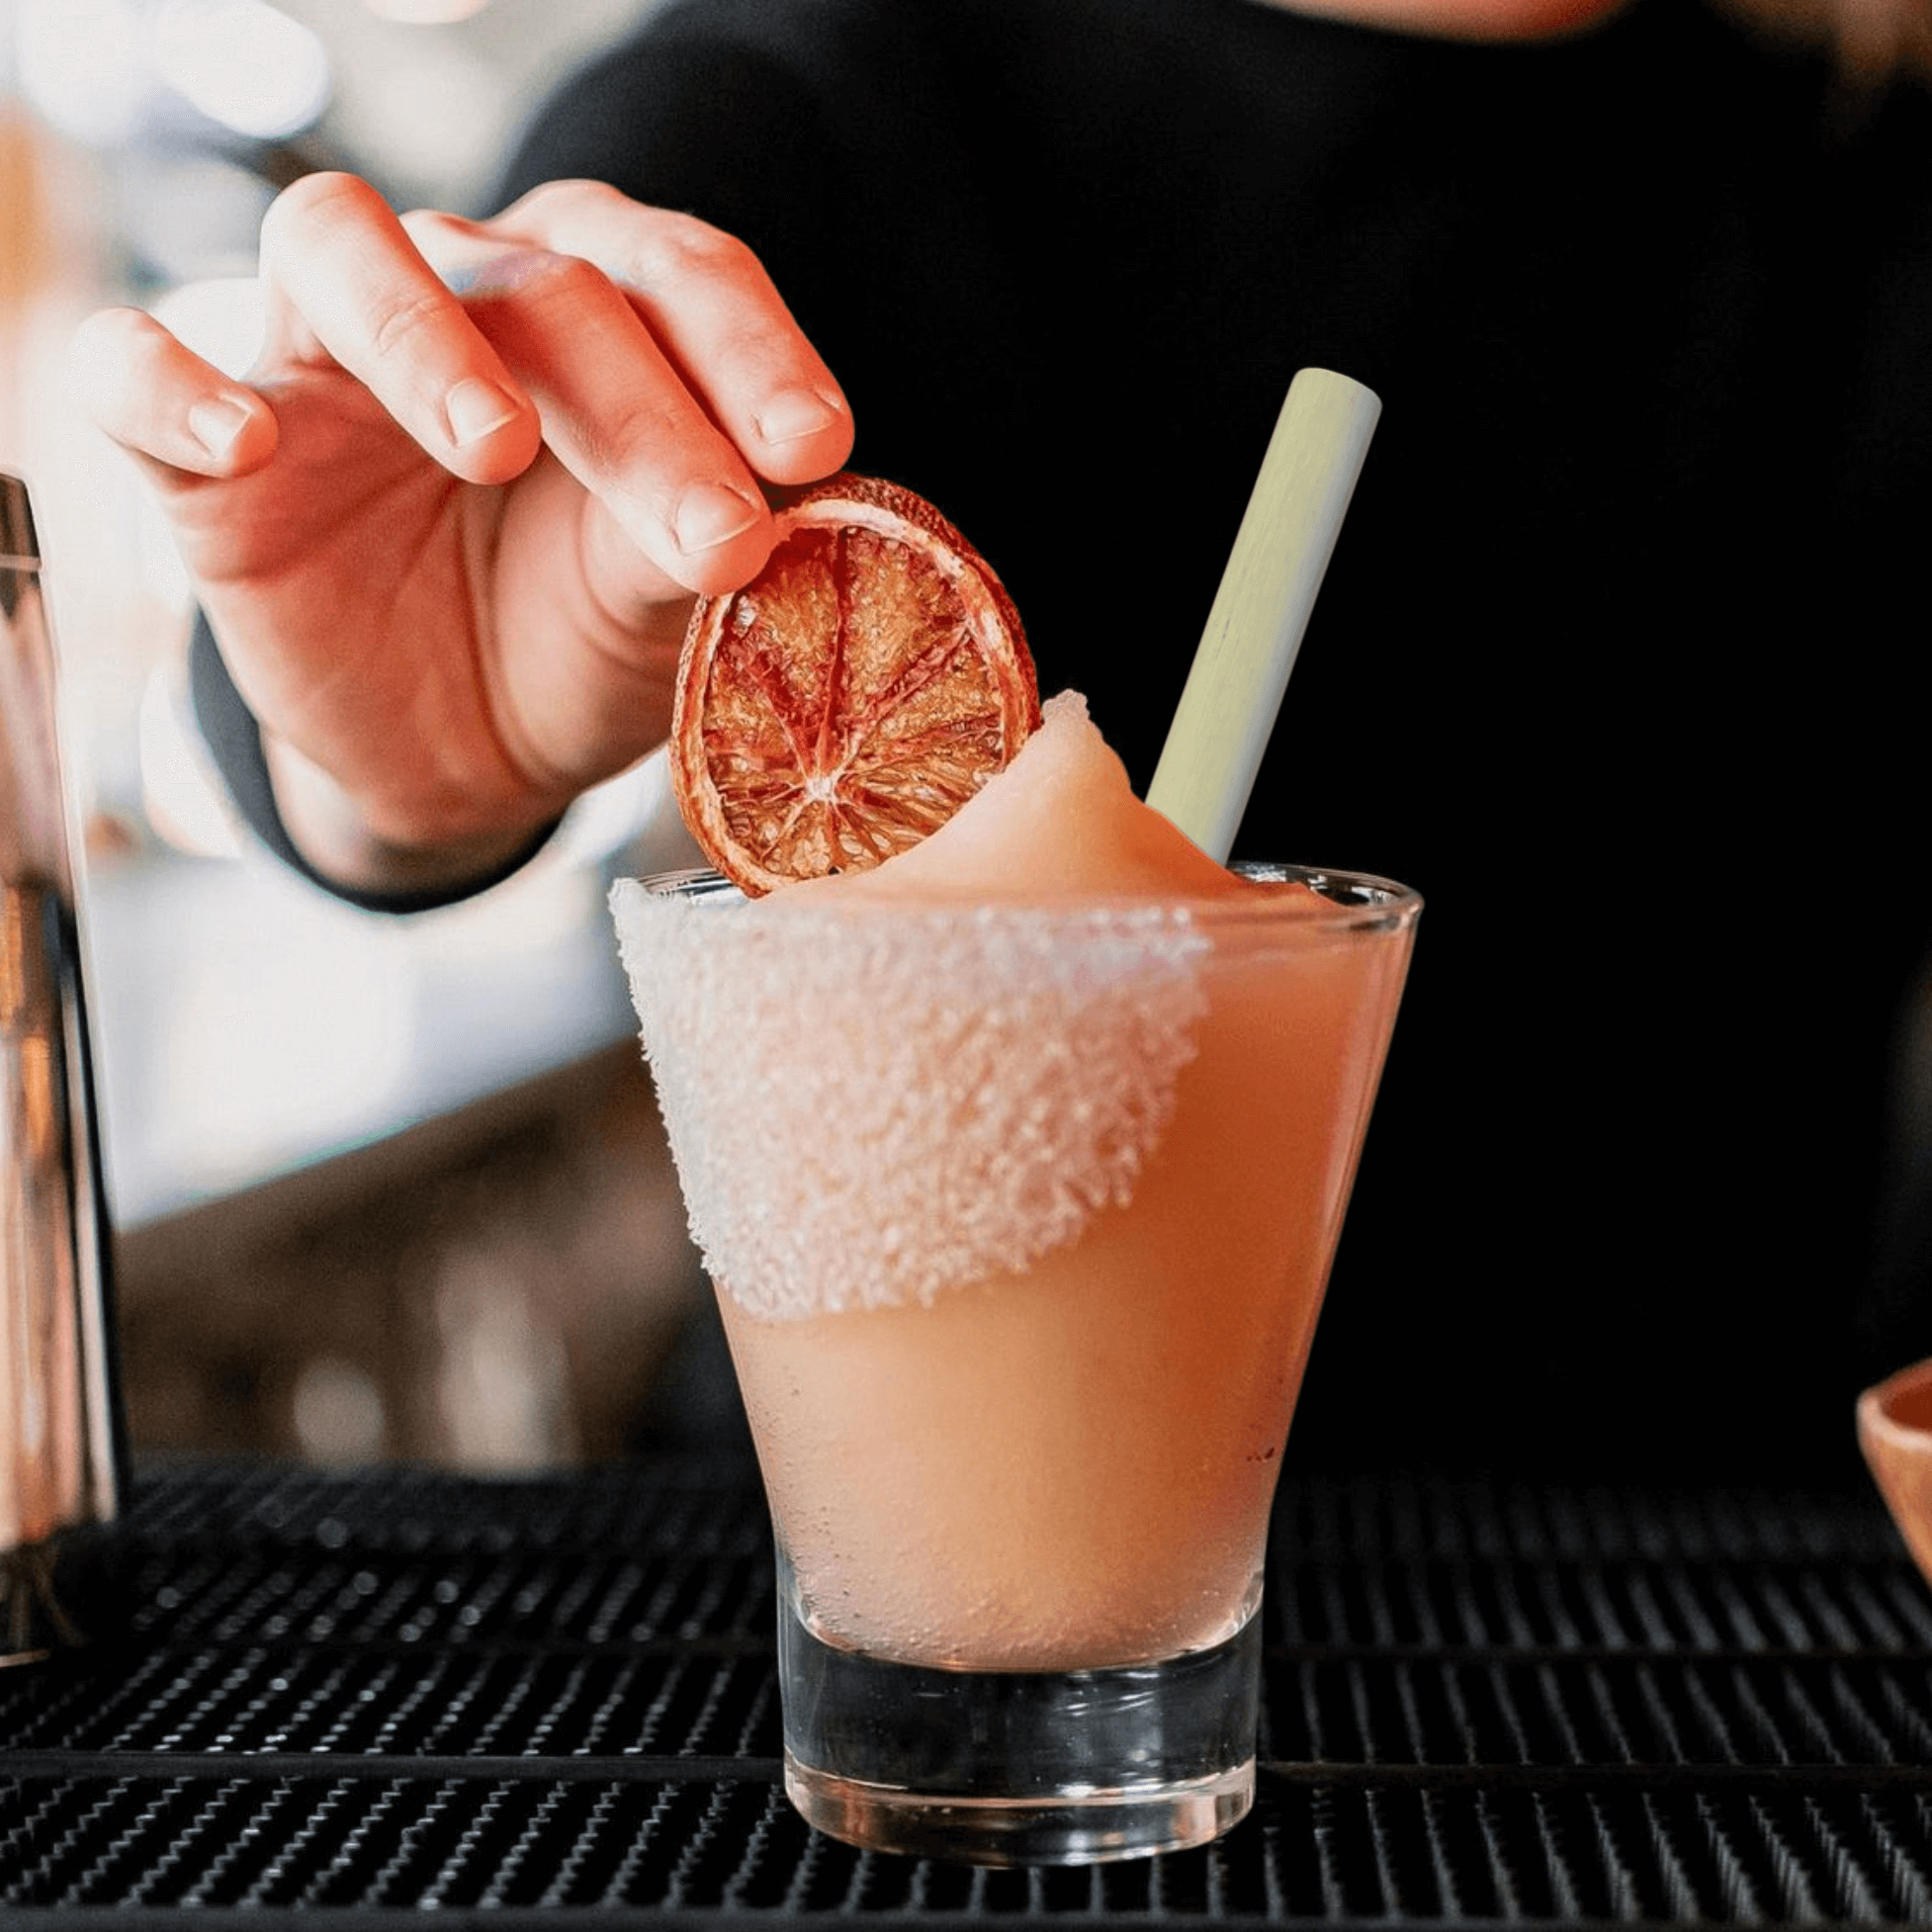 A hand is placing a dried grapefruit slice as a garnish on a frozen paloma served in a glass with a salted rim. The glass sits on a dark bar surface and contains a reed straw, which resembles bamboo for an eco-friendly touch. The background is blurred, emphasizing the drink's colorful and stylish presentation, highlighting the sustainability aspect of the straw.